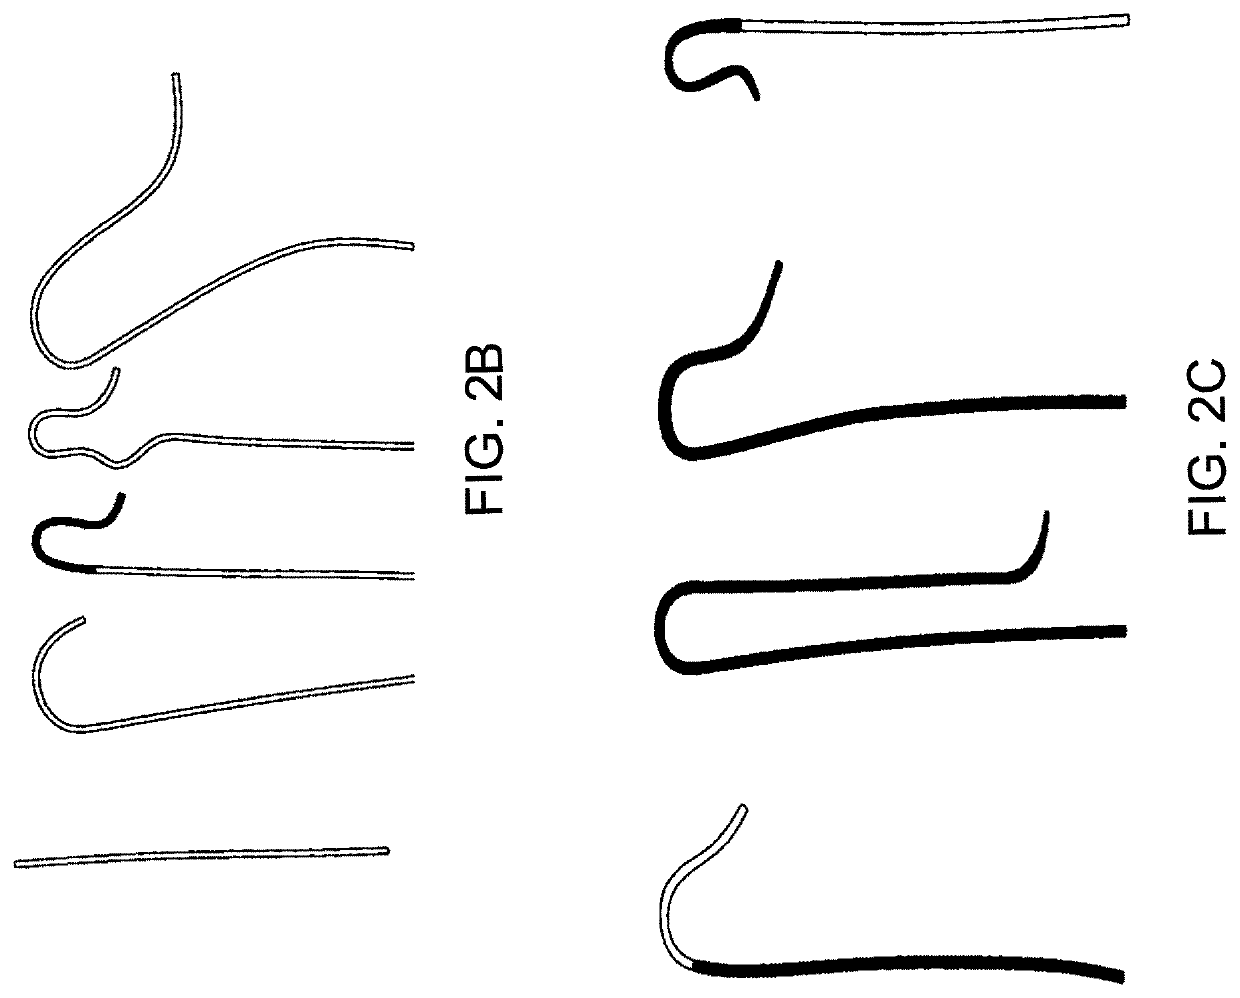 Endovascular catheter with controllable tip